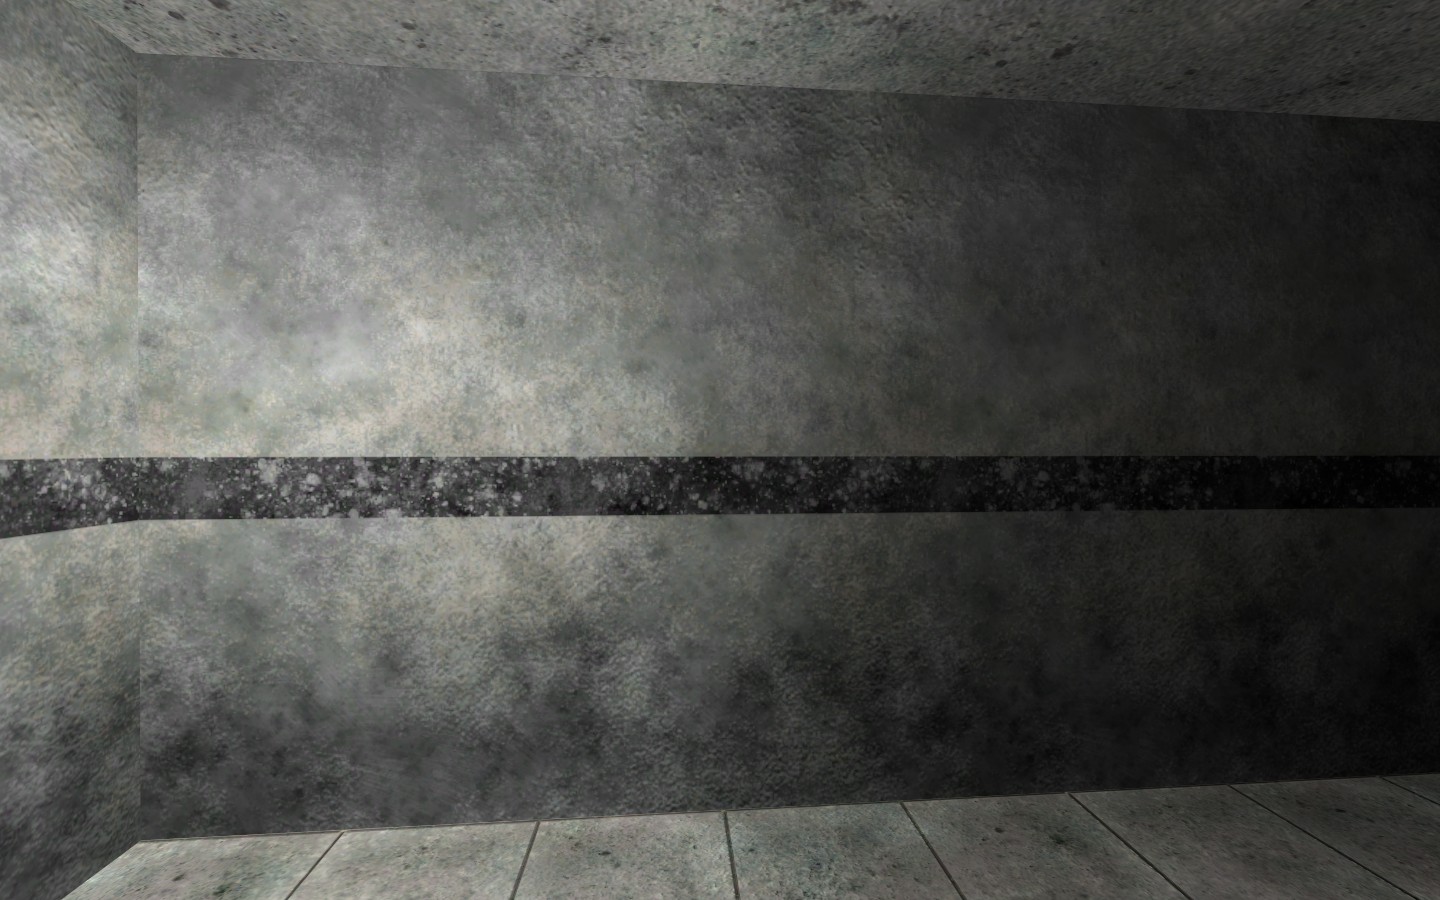 My first ever procedural textures, from 2009